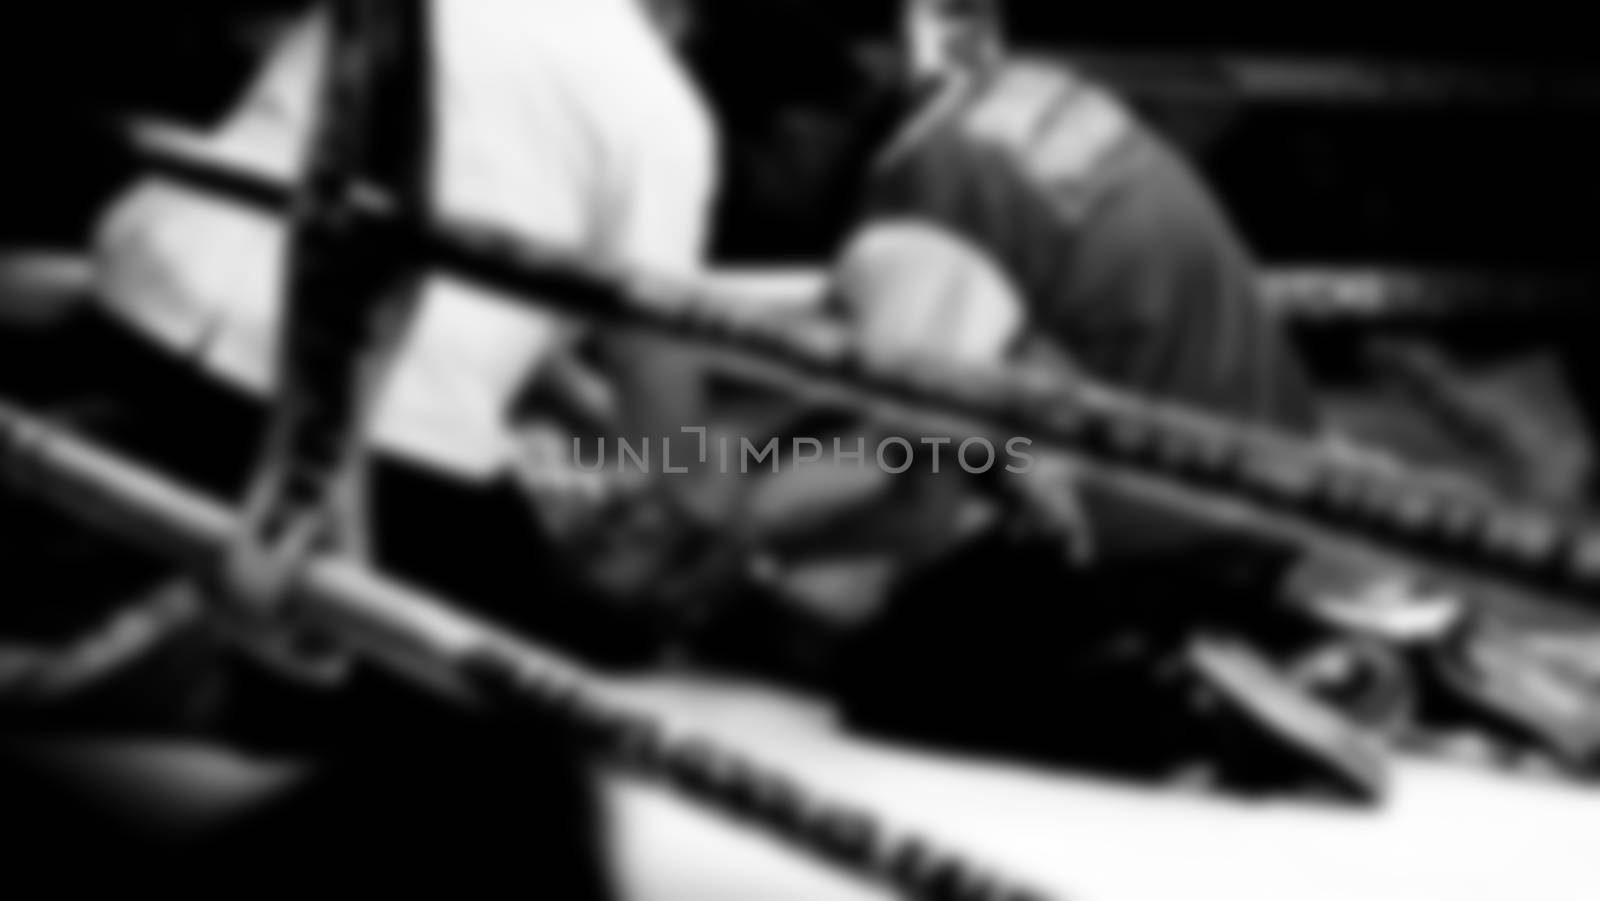 Blurred images of Thai boxing or Muay Thai on stage by gnepphoto